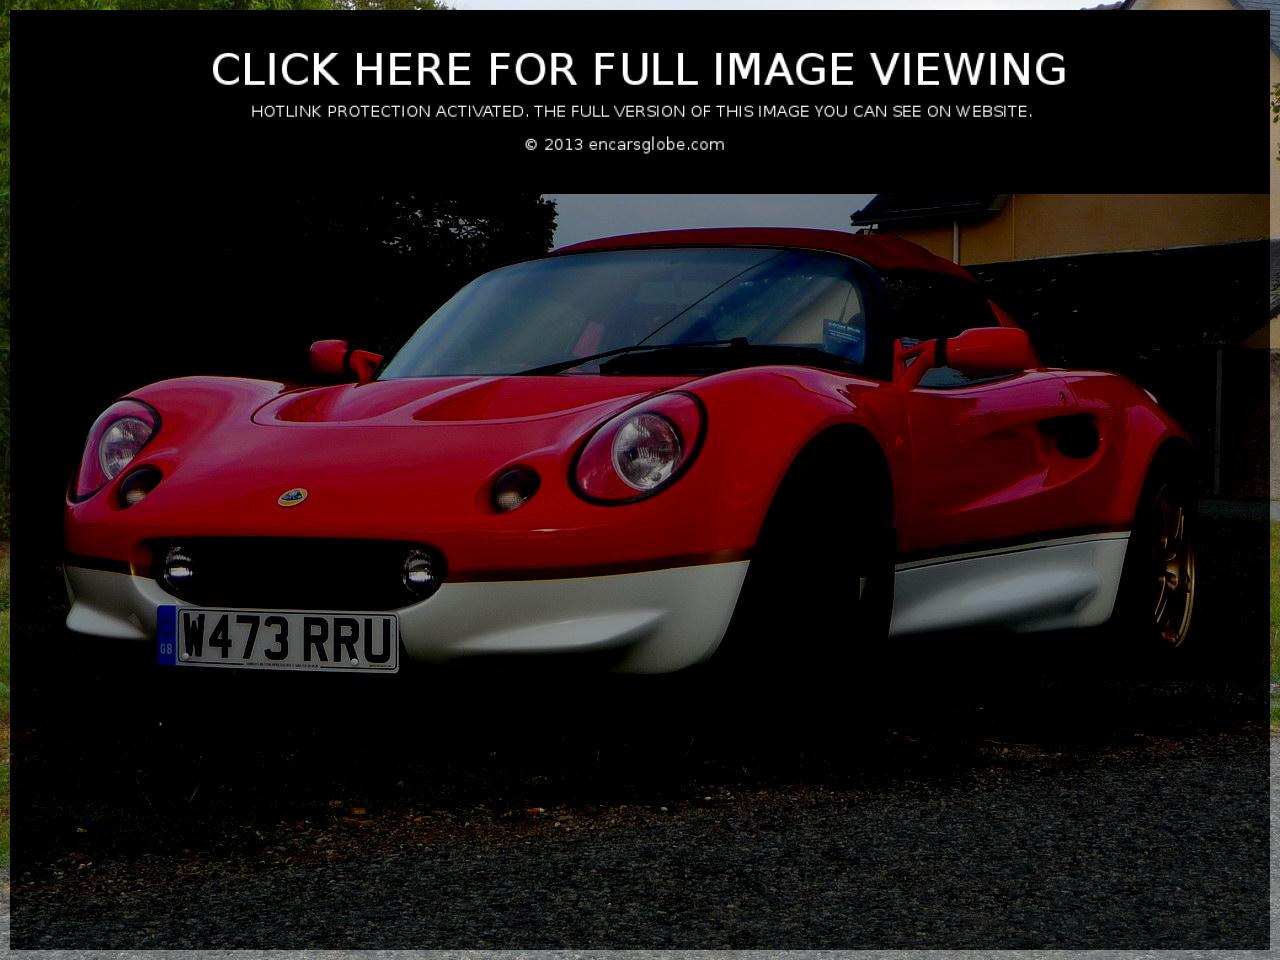 Lotus Elise 111S type 49 Photo Gallery: Photo #08 out of 9, Image ...